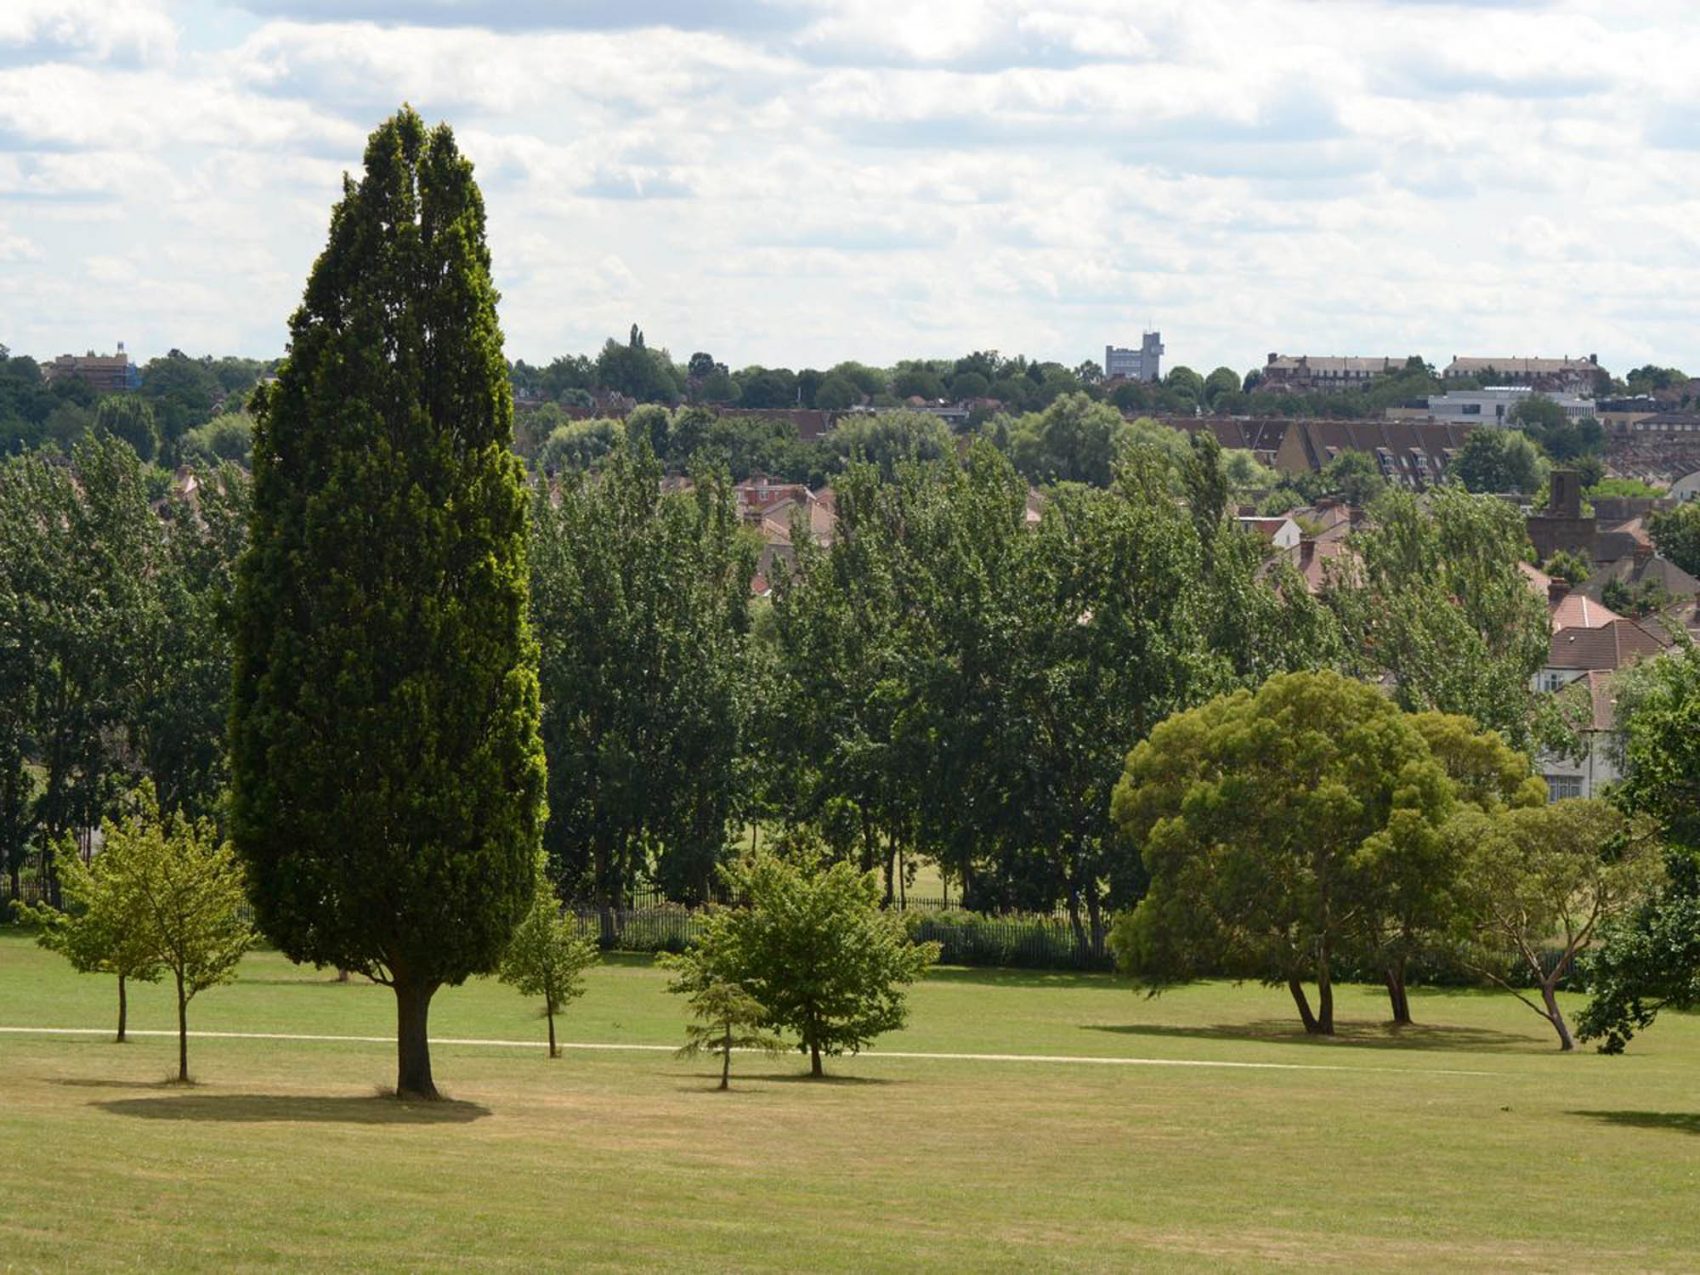 View from Gladstone Park, Cricklewood